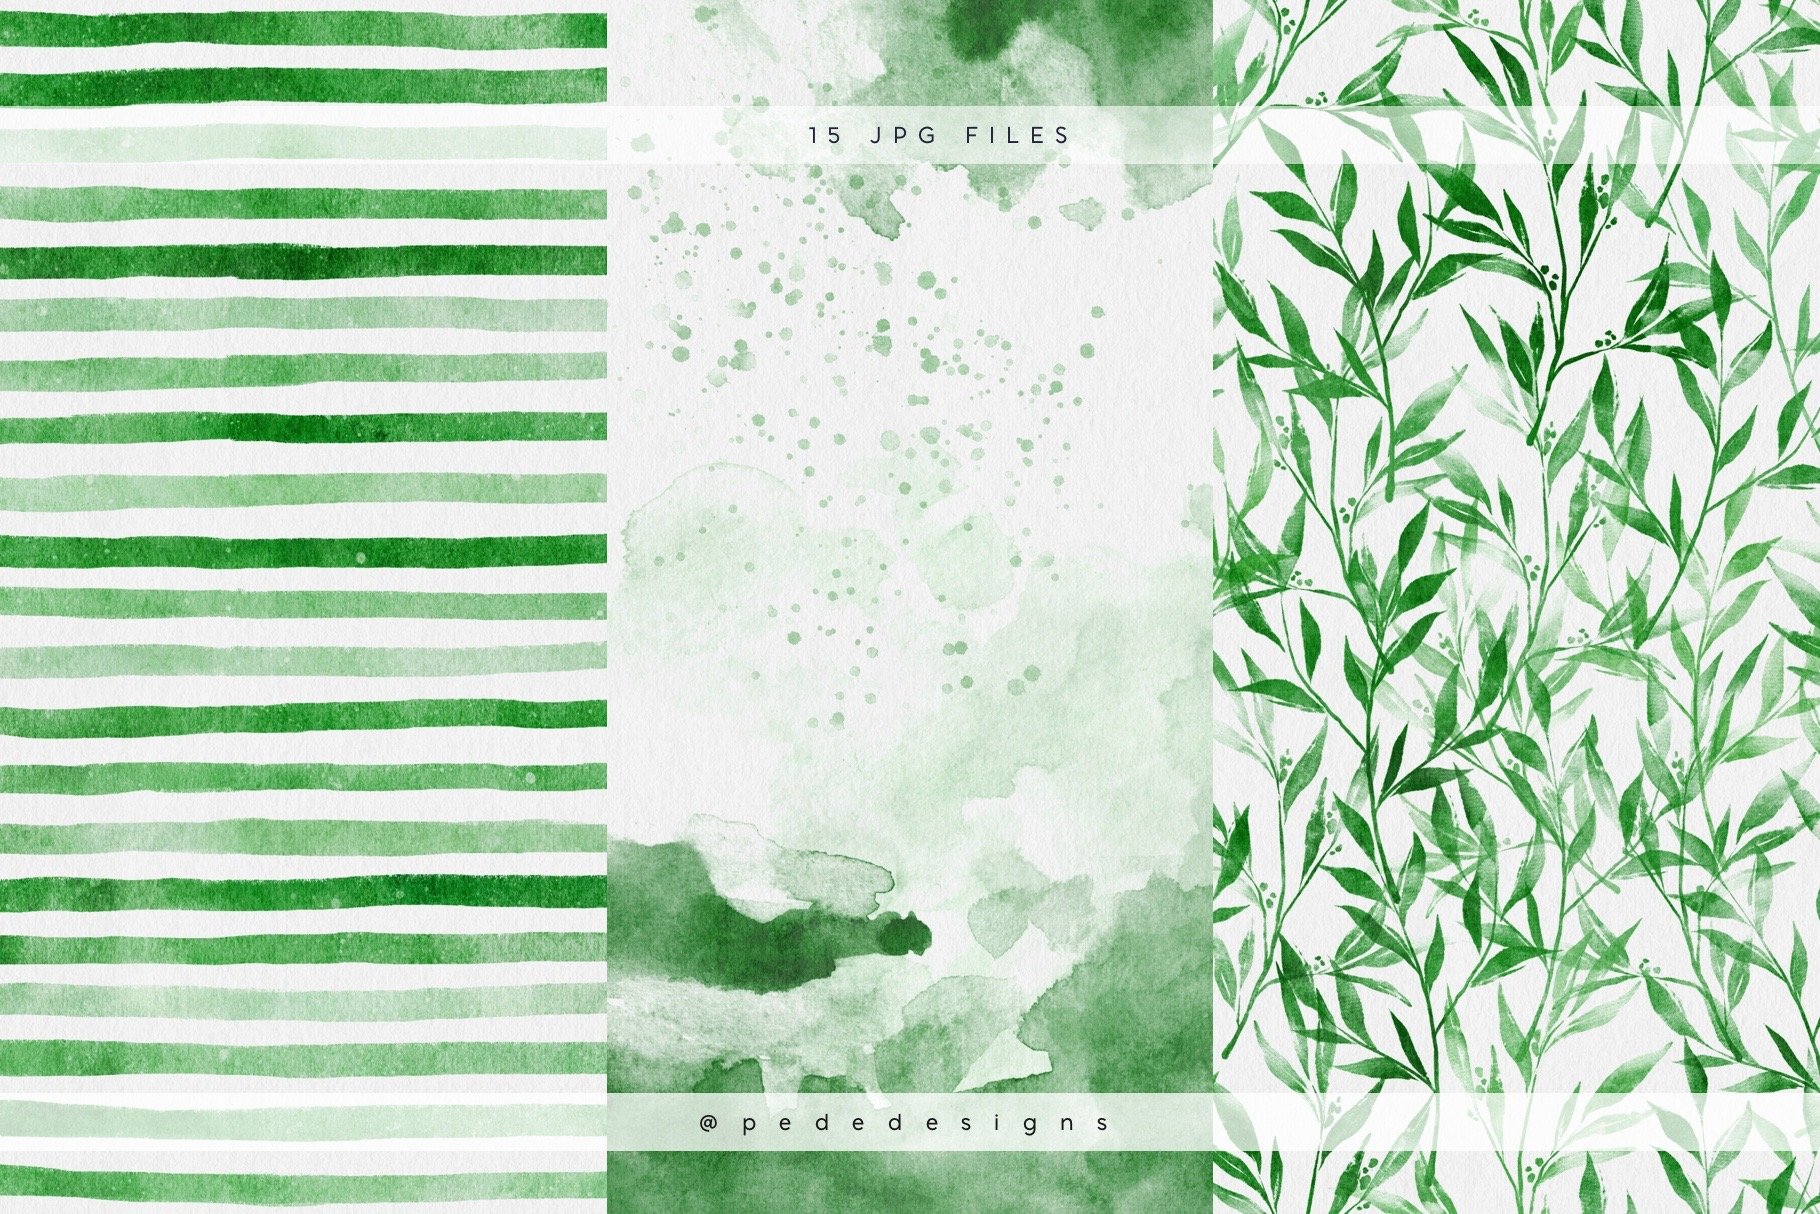 Nice watercolor green illustrations for your background.